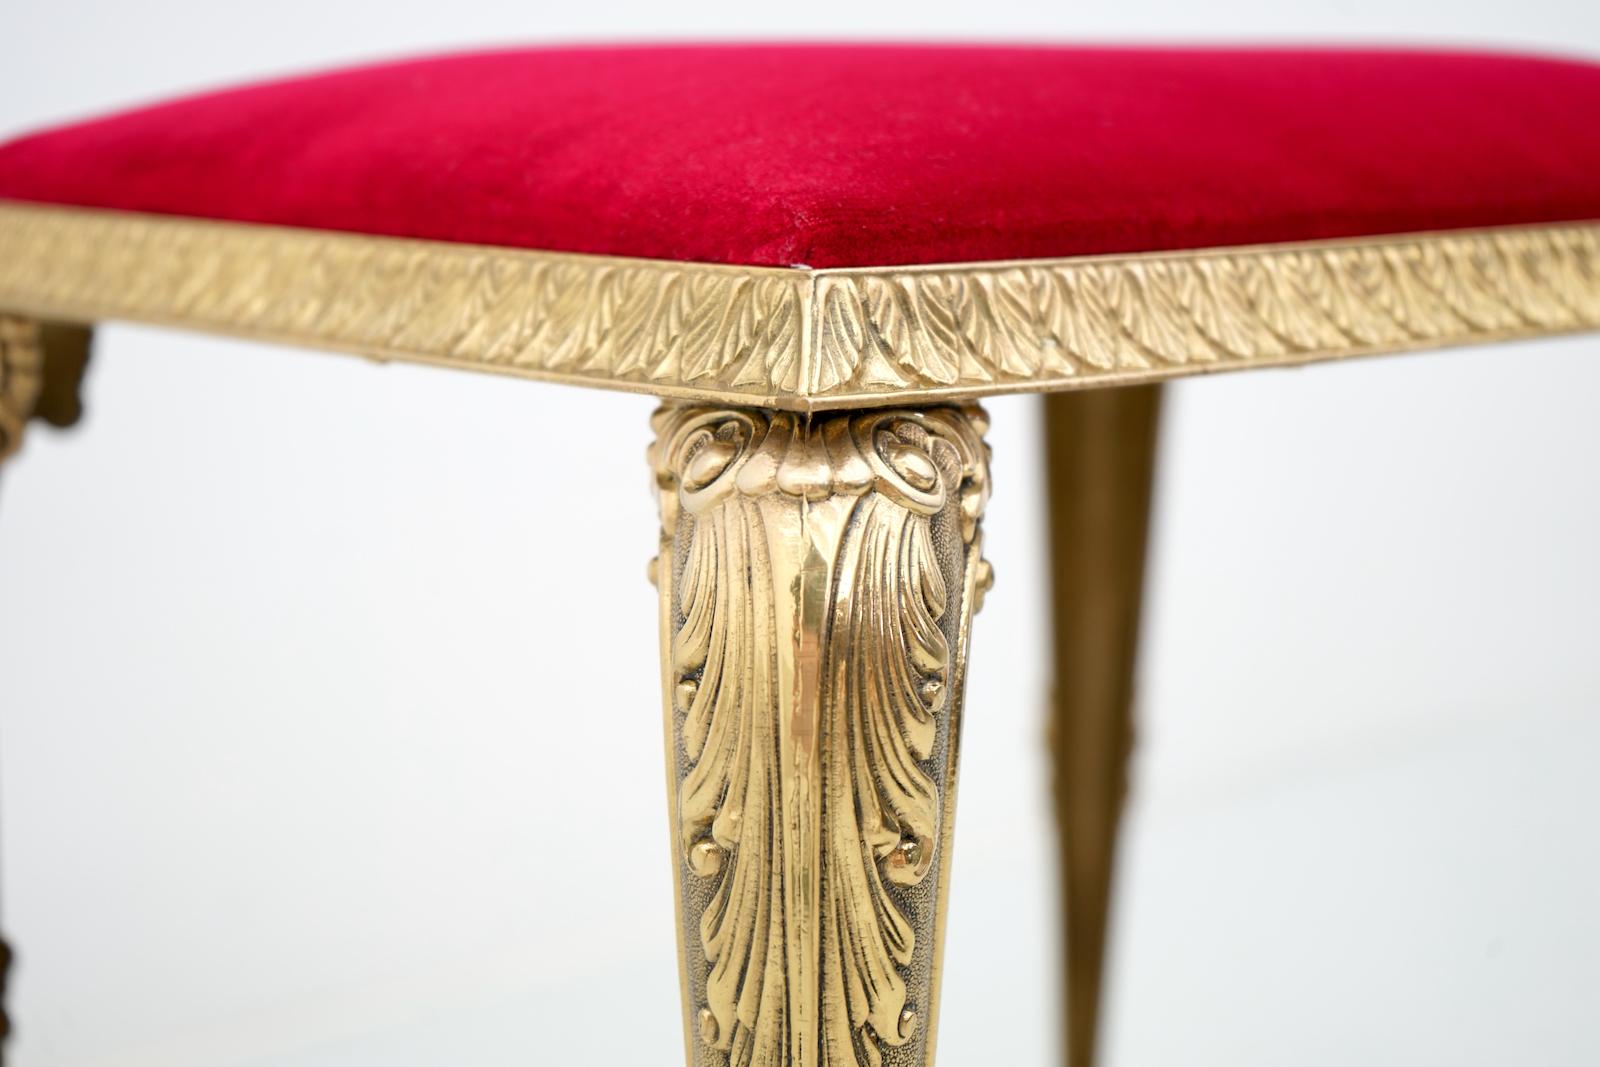 Mid-Century Modern Decorative Brass Stool with Red Fabric, circa 1970s For Sale